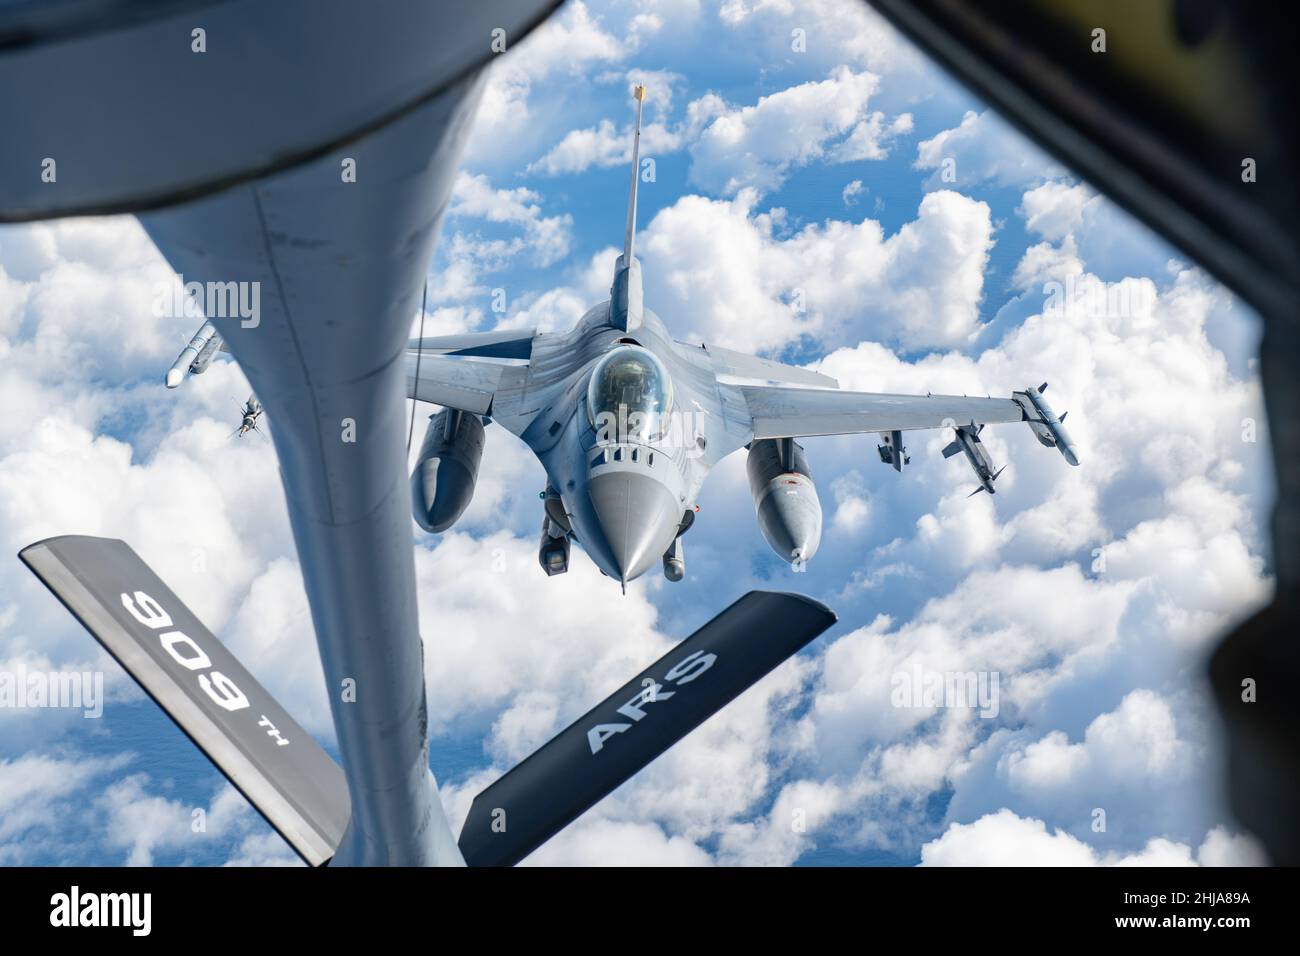 A U.S. Air Force F-16 Fighting Falcon assigned to the 14th Fighter Squadron at Misawa Air Base approaches a 909th Air Refueling Squadron KC-135 Stratotanker to receive fuel during Exercise PACIFIC WEASEL (PAC WEASEL) over the Pacific Ocean Jan. 21, 2022. The goal of PAC WEASEL is to enhance the defensive capabilities of U.S. Forces Japan and Japanese allies. The 909th ARS refueled fighter jets during the exercise, supporting the U.S.’ commitment to defending a free and open Indo-Pacific region. (U.S. Air Force photo by Airman 1st Class Cesar J. Navarro) Stock Photo